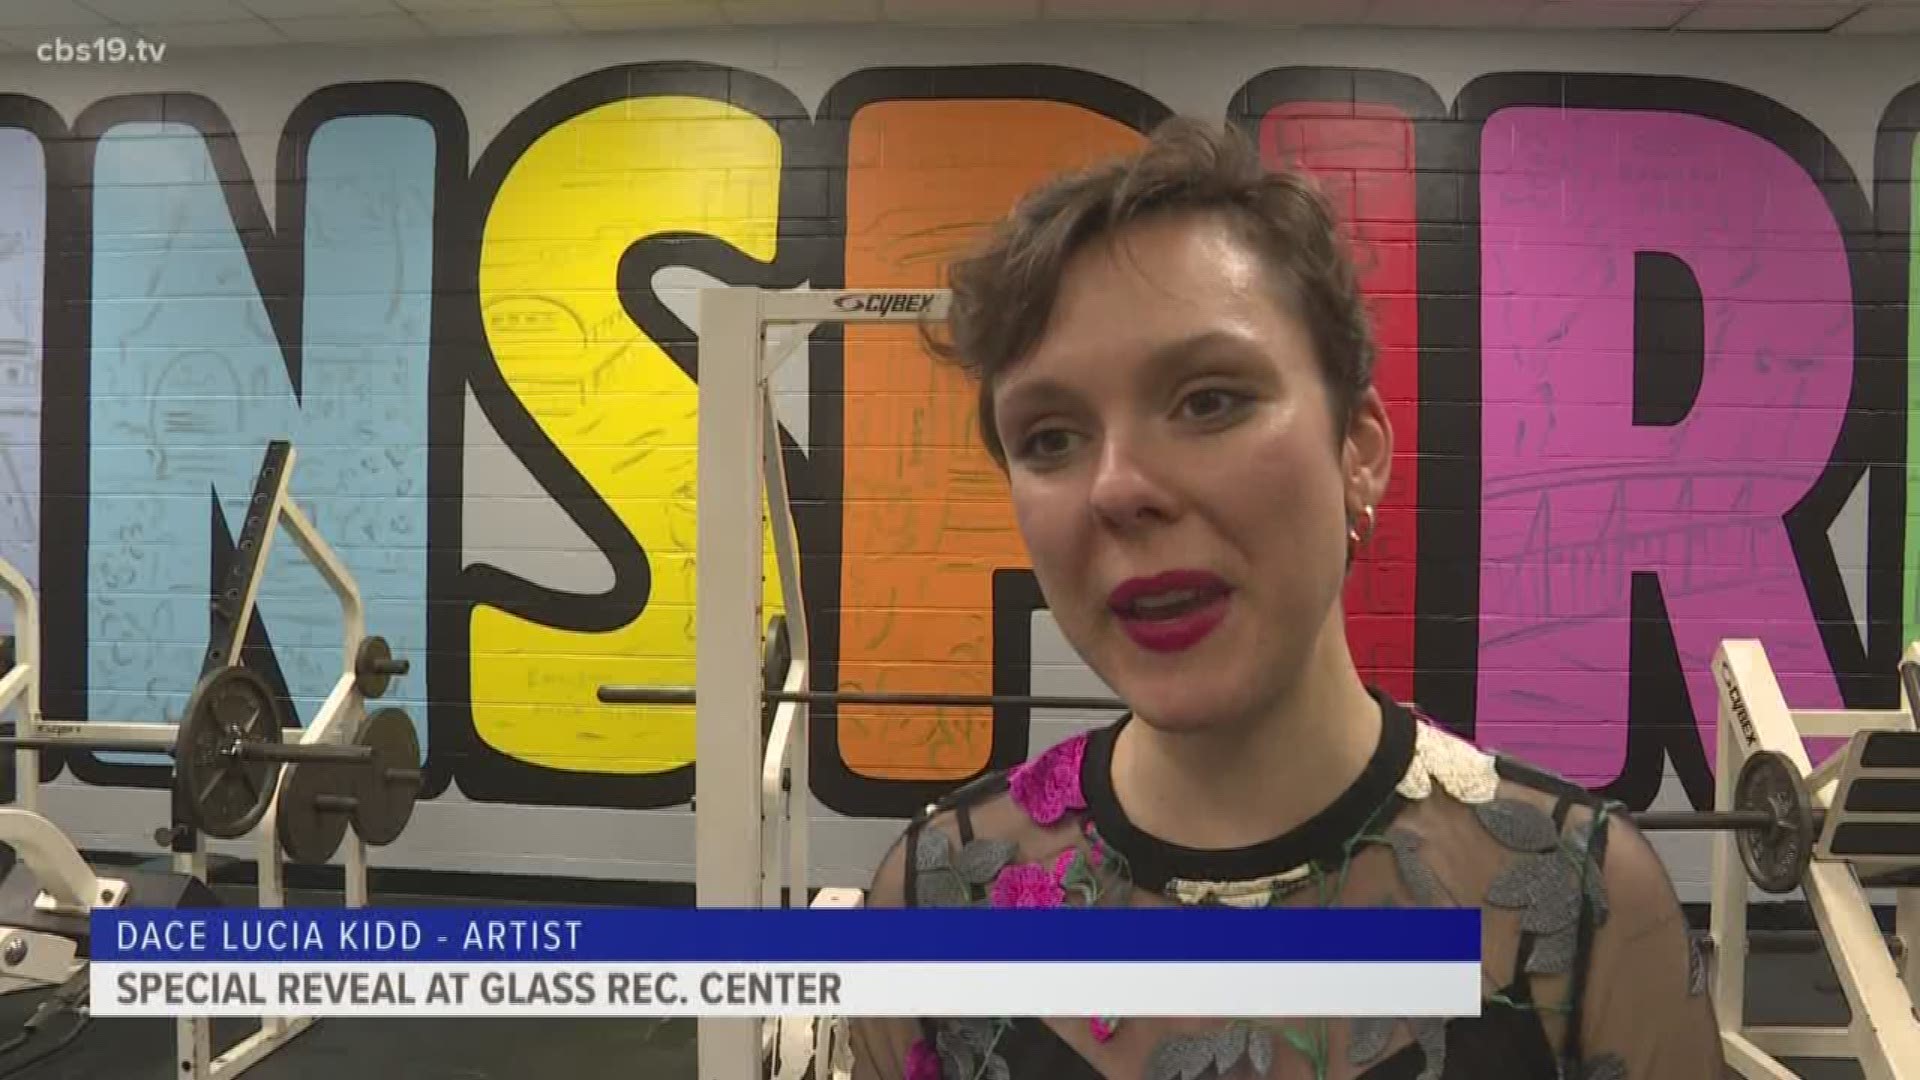 The Tyler Glass Recreation Center had special reveal celebration for its newest addition.